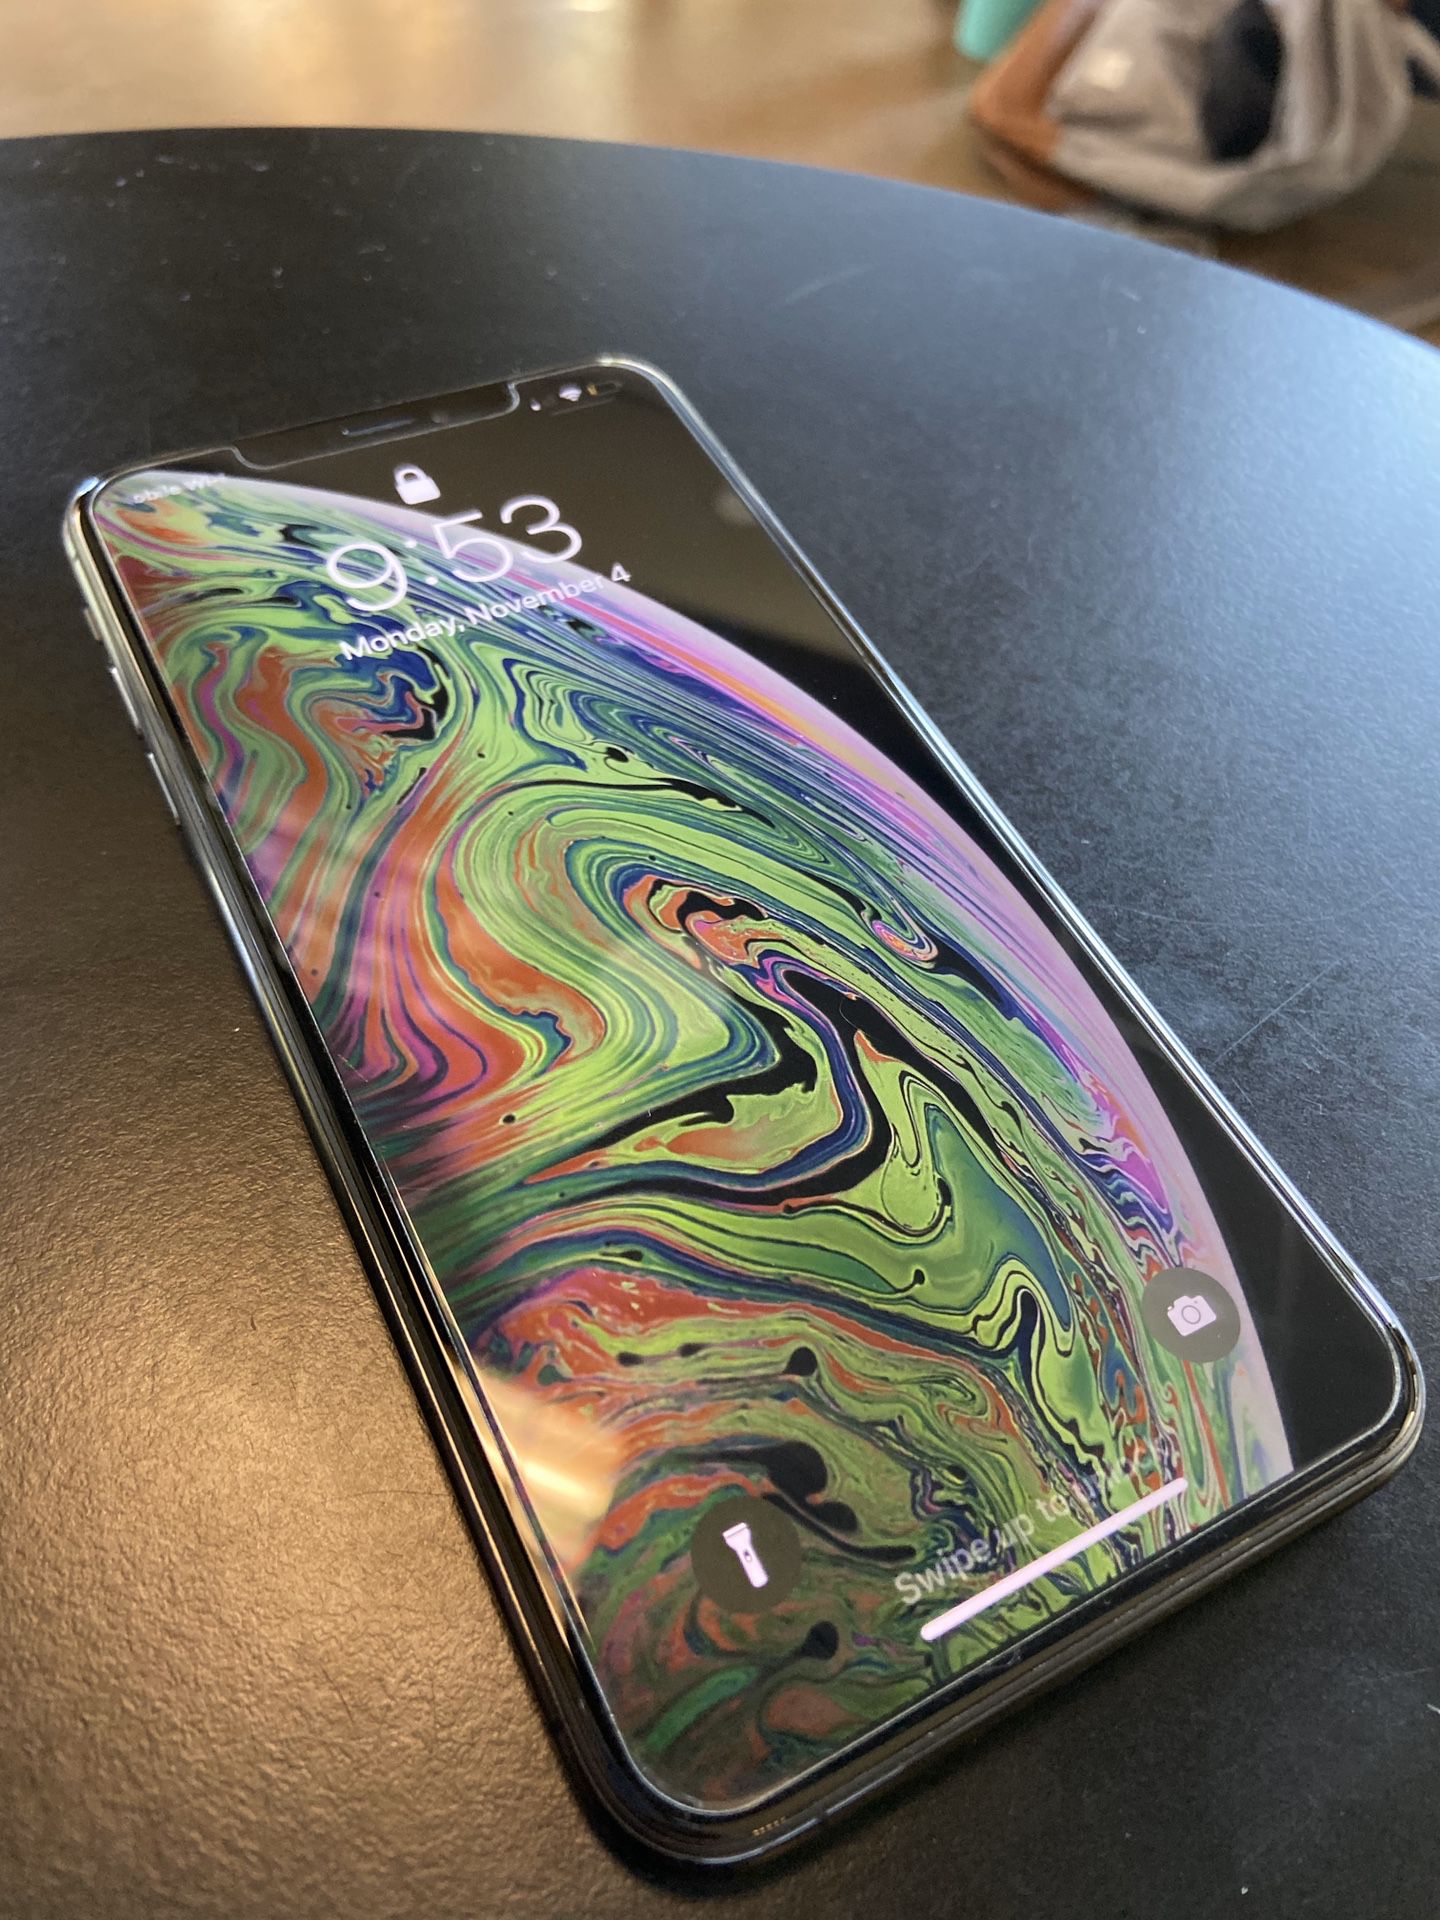 iPhone XS Max 64 GB Unlocked (Black) with 2-Year AppleCare+